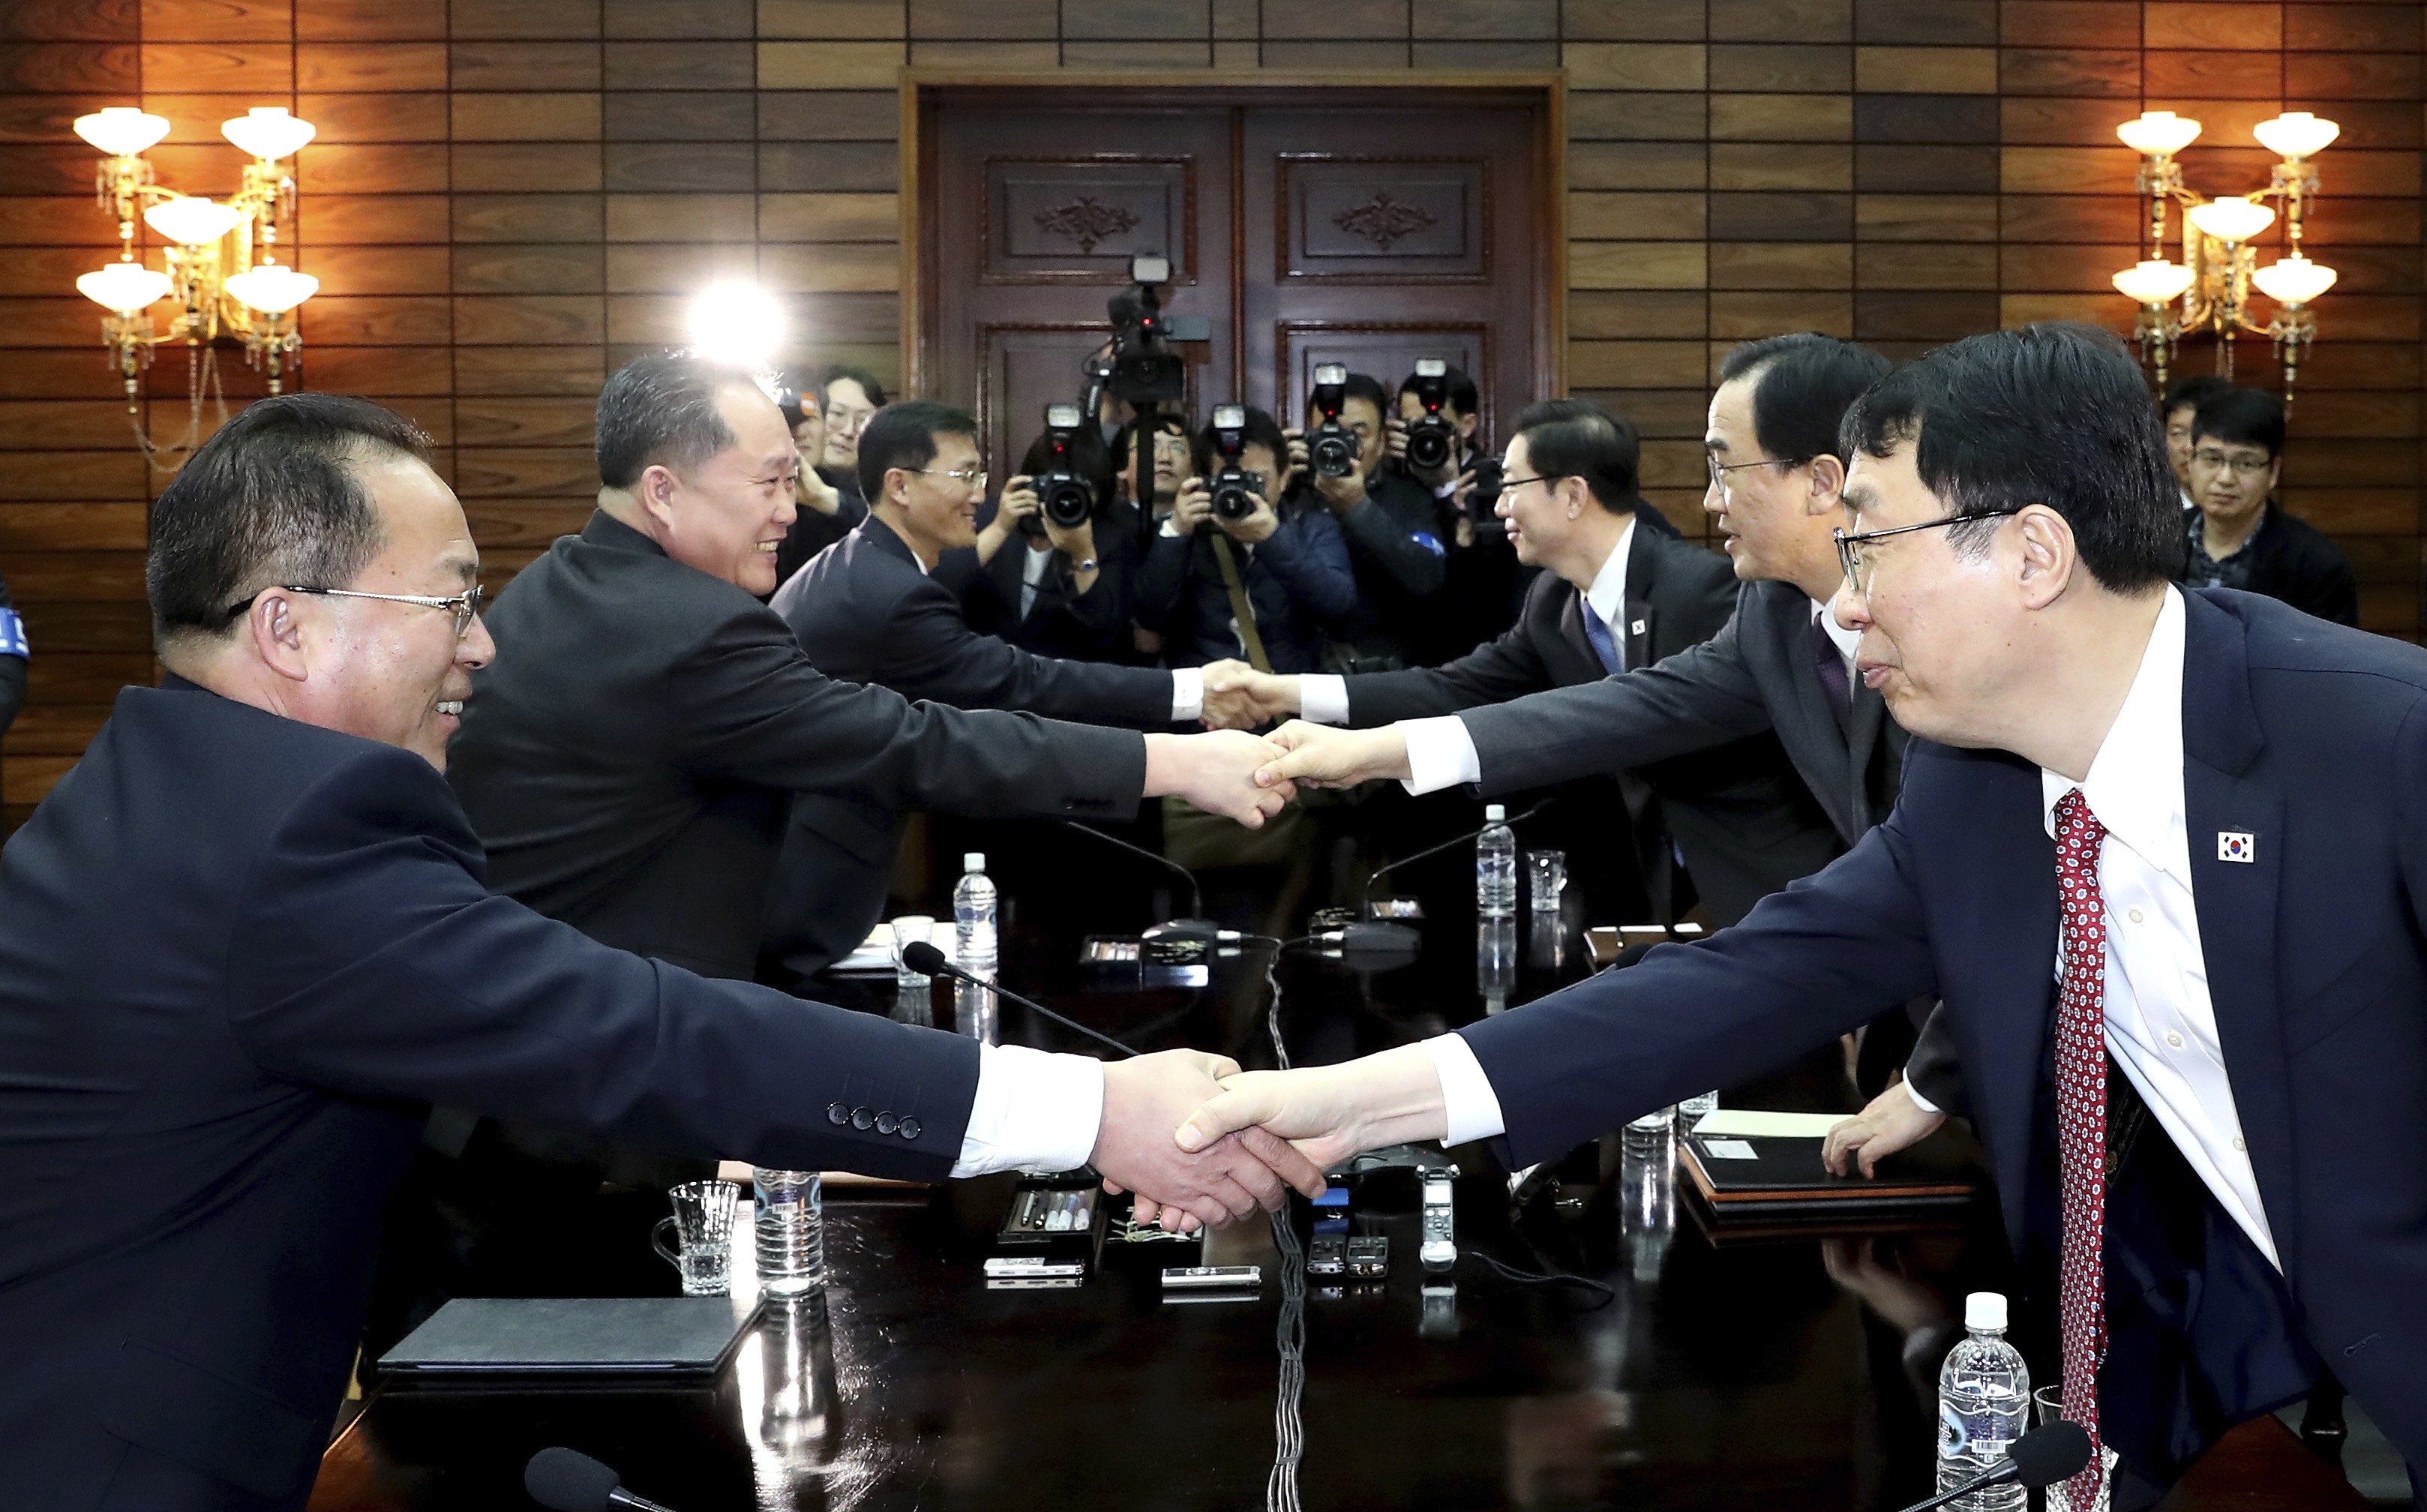 Was North Korean leader’s surprise international debut in Beijing an auspicious sign ahead of meetings with the leaders of South Korea and the United States – or an attempt to gain an advantage?